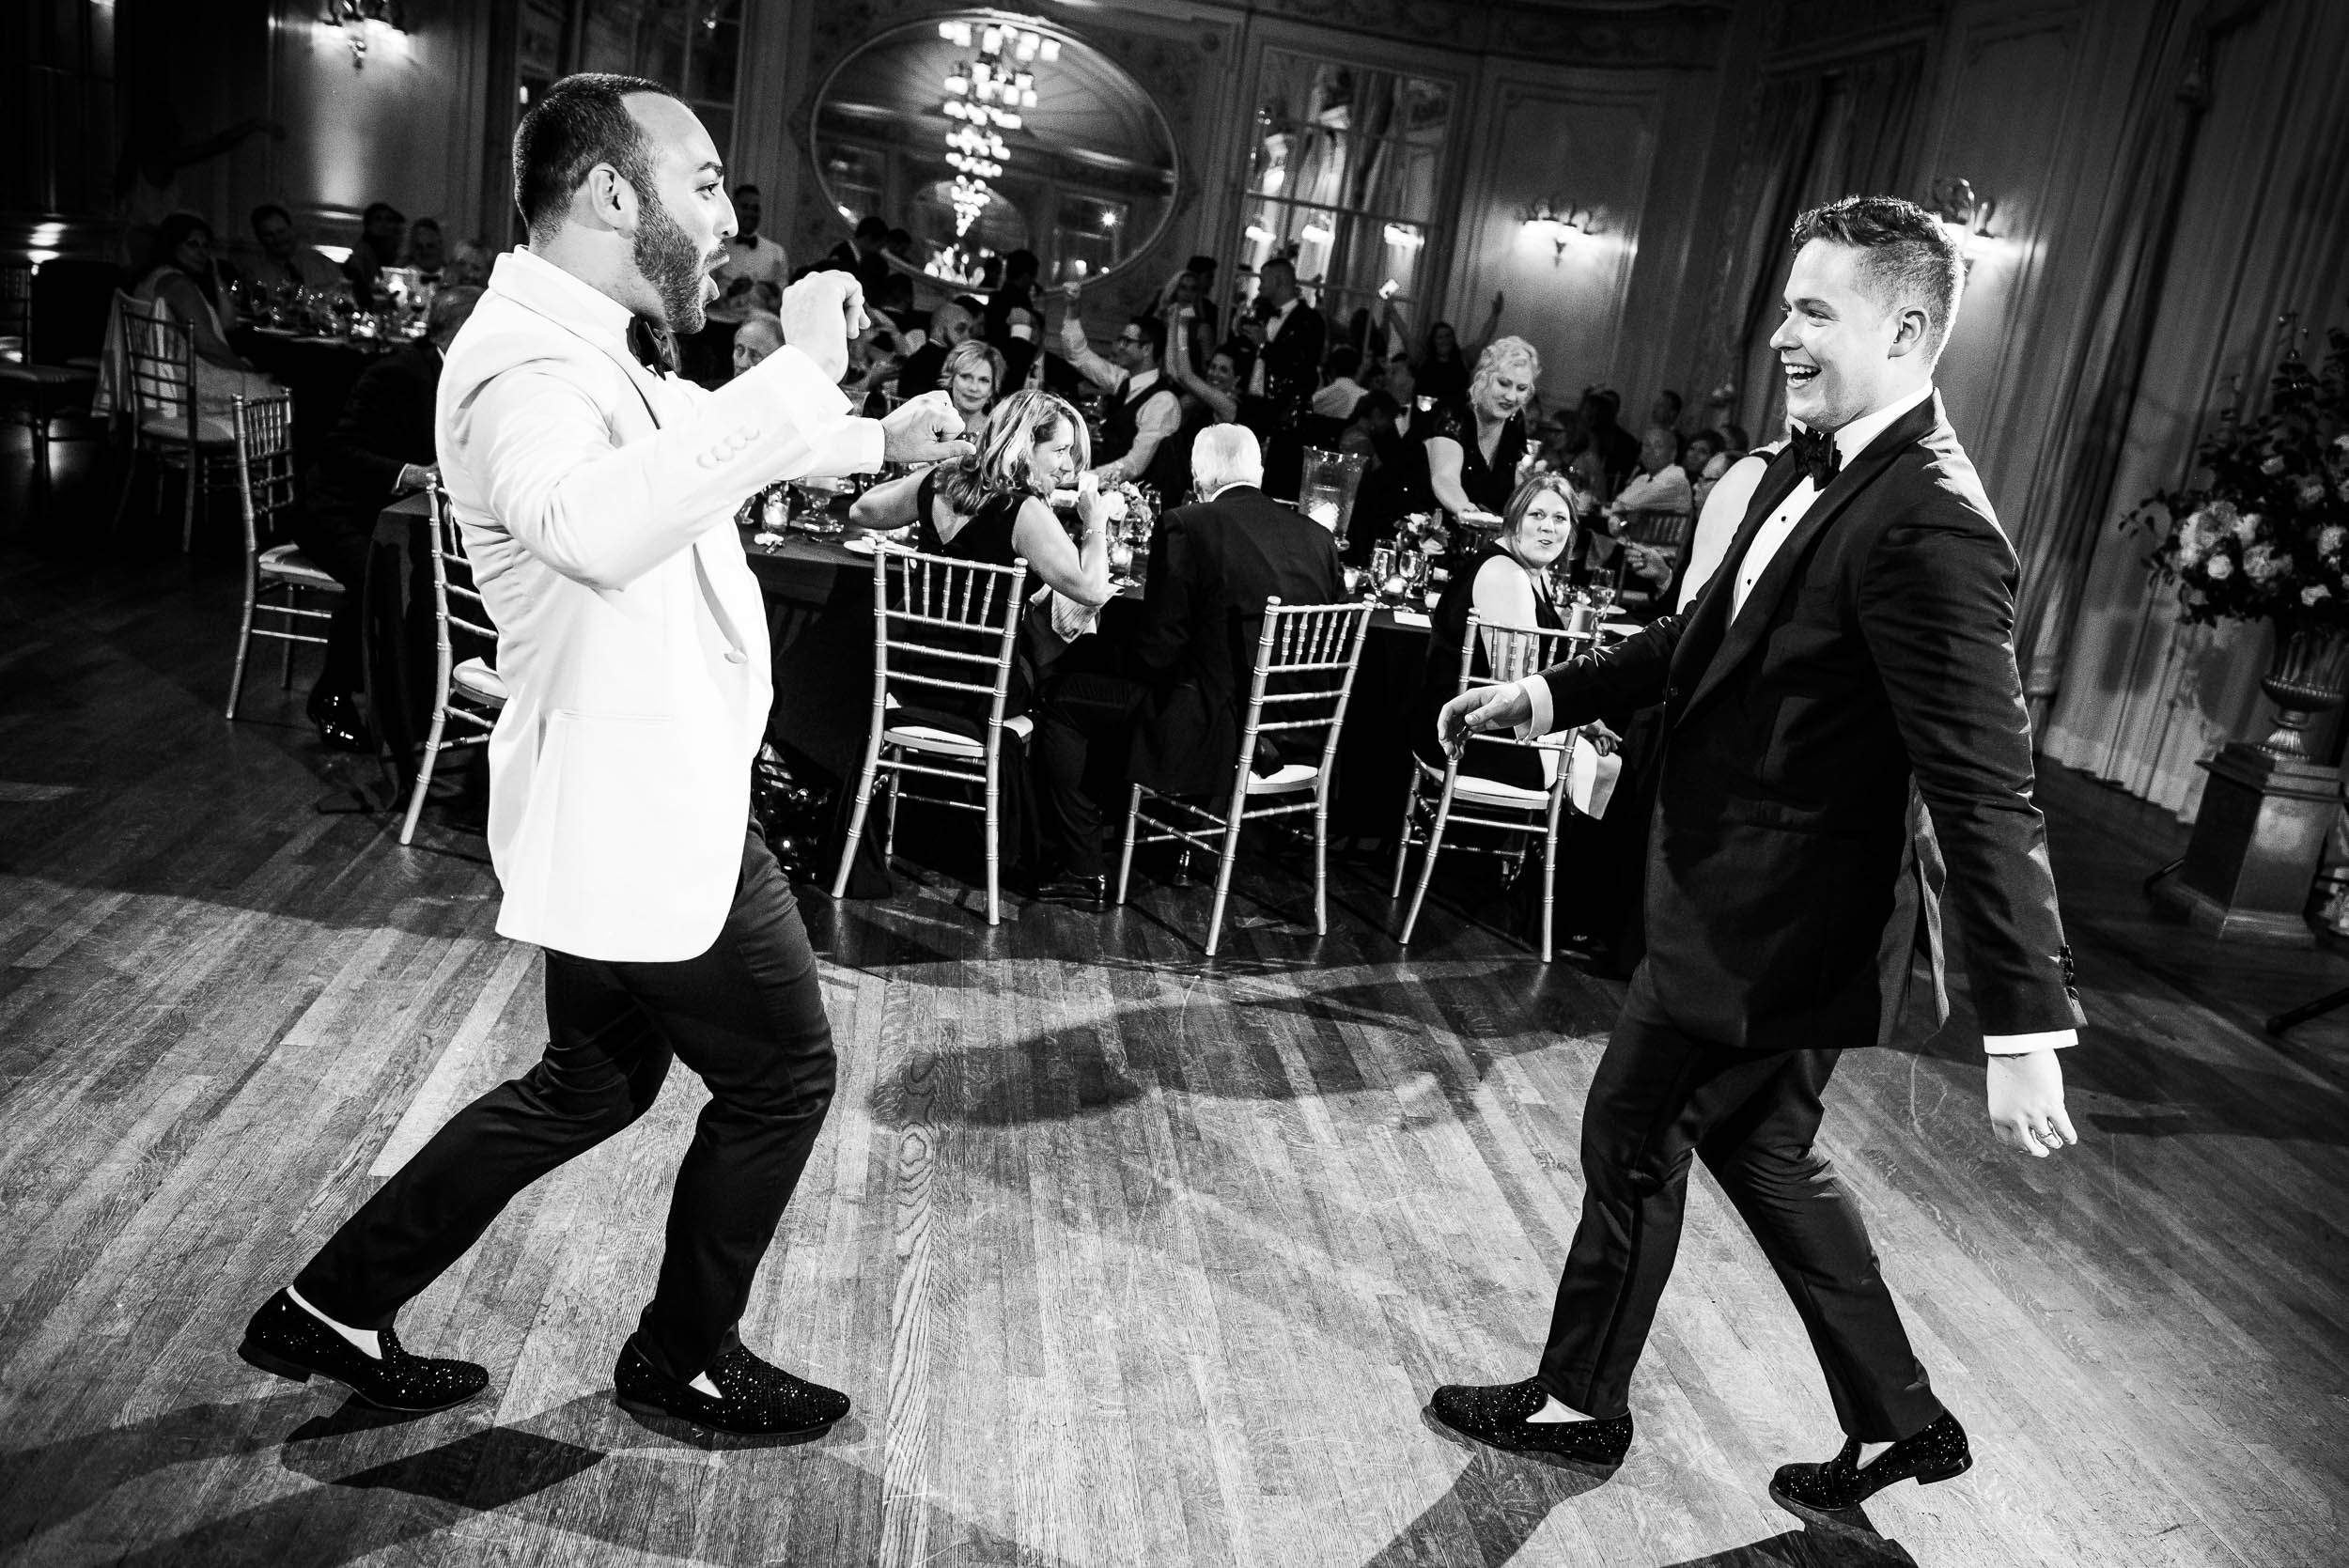 Grooms celebrating at luxurious fall wedding at the Chicago Symphony Center captured by J. Brown Photography. See more wedding ideas at jbrownphotography.com!